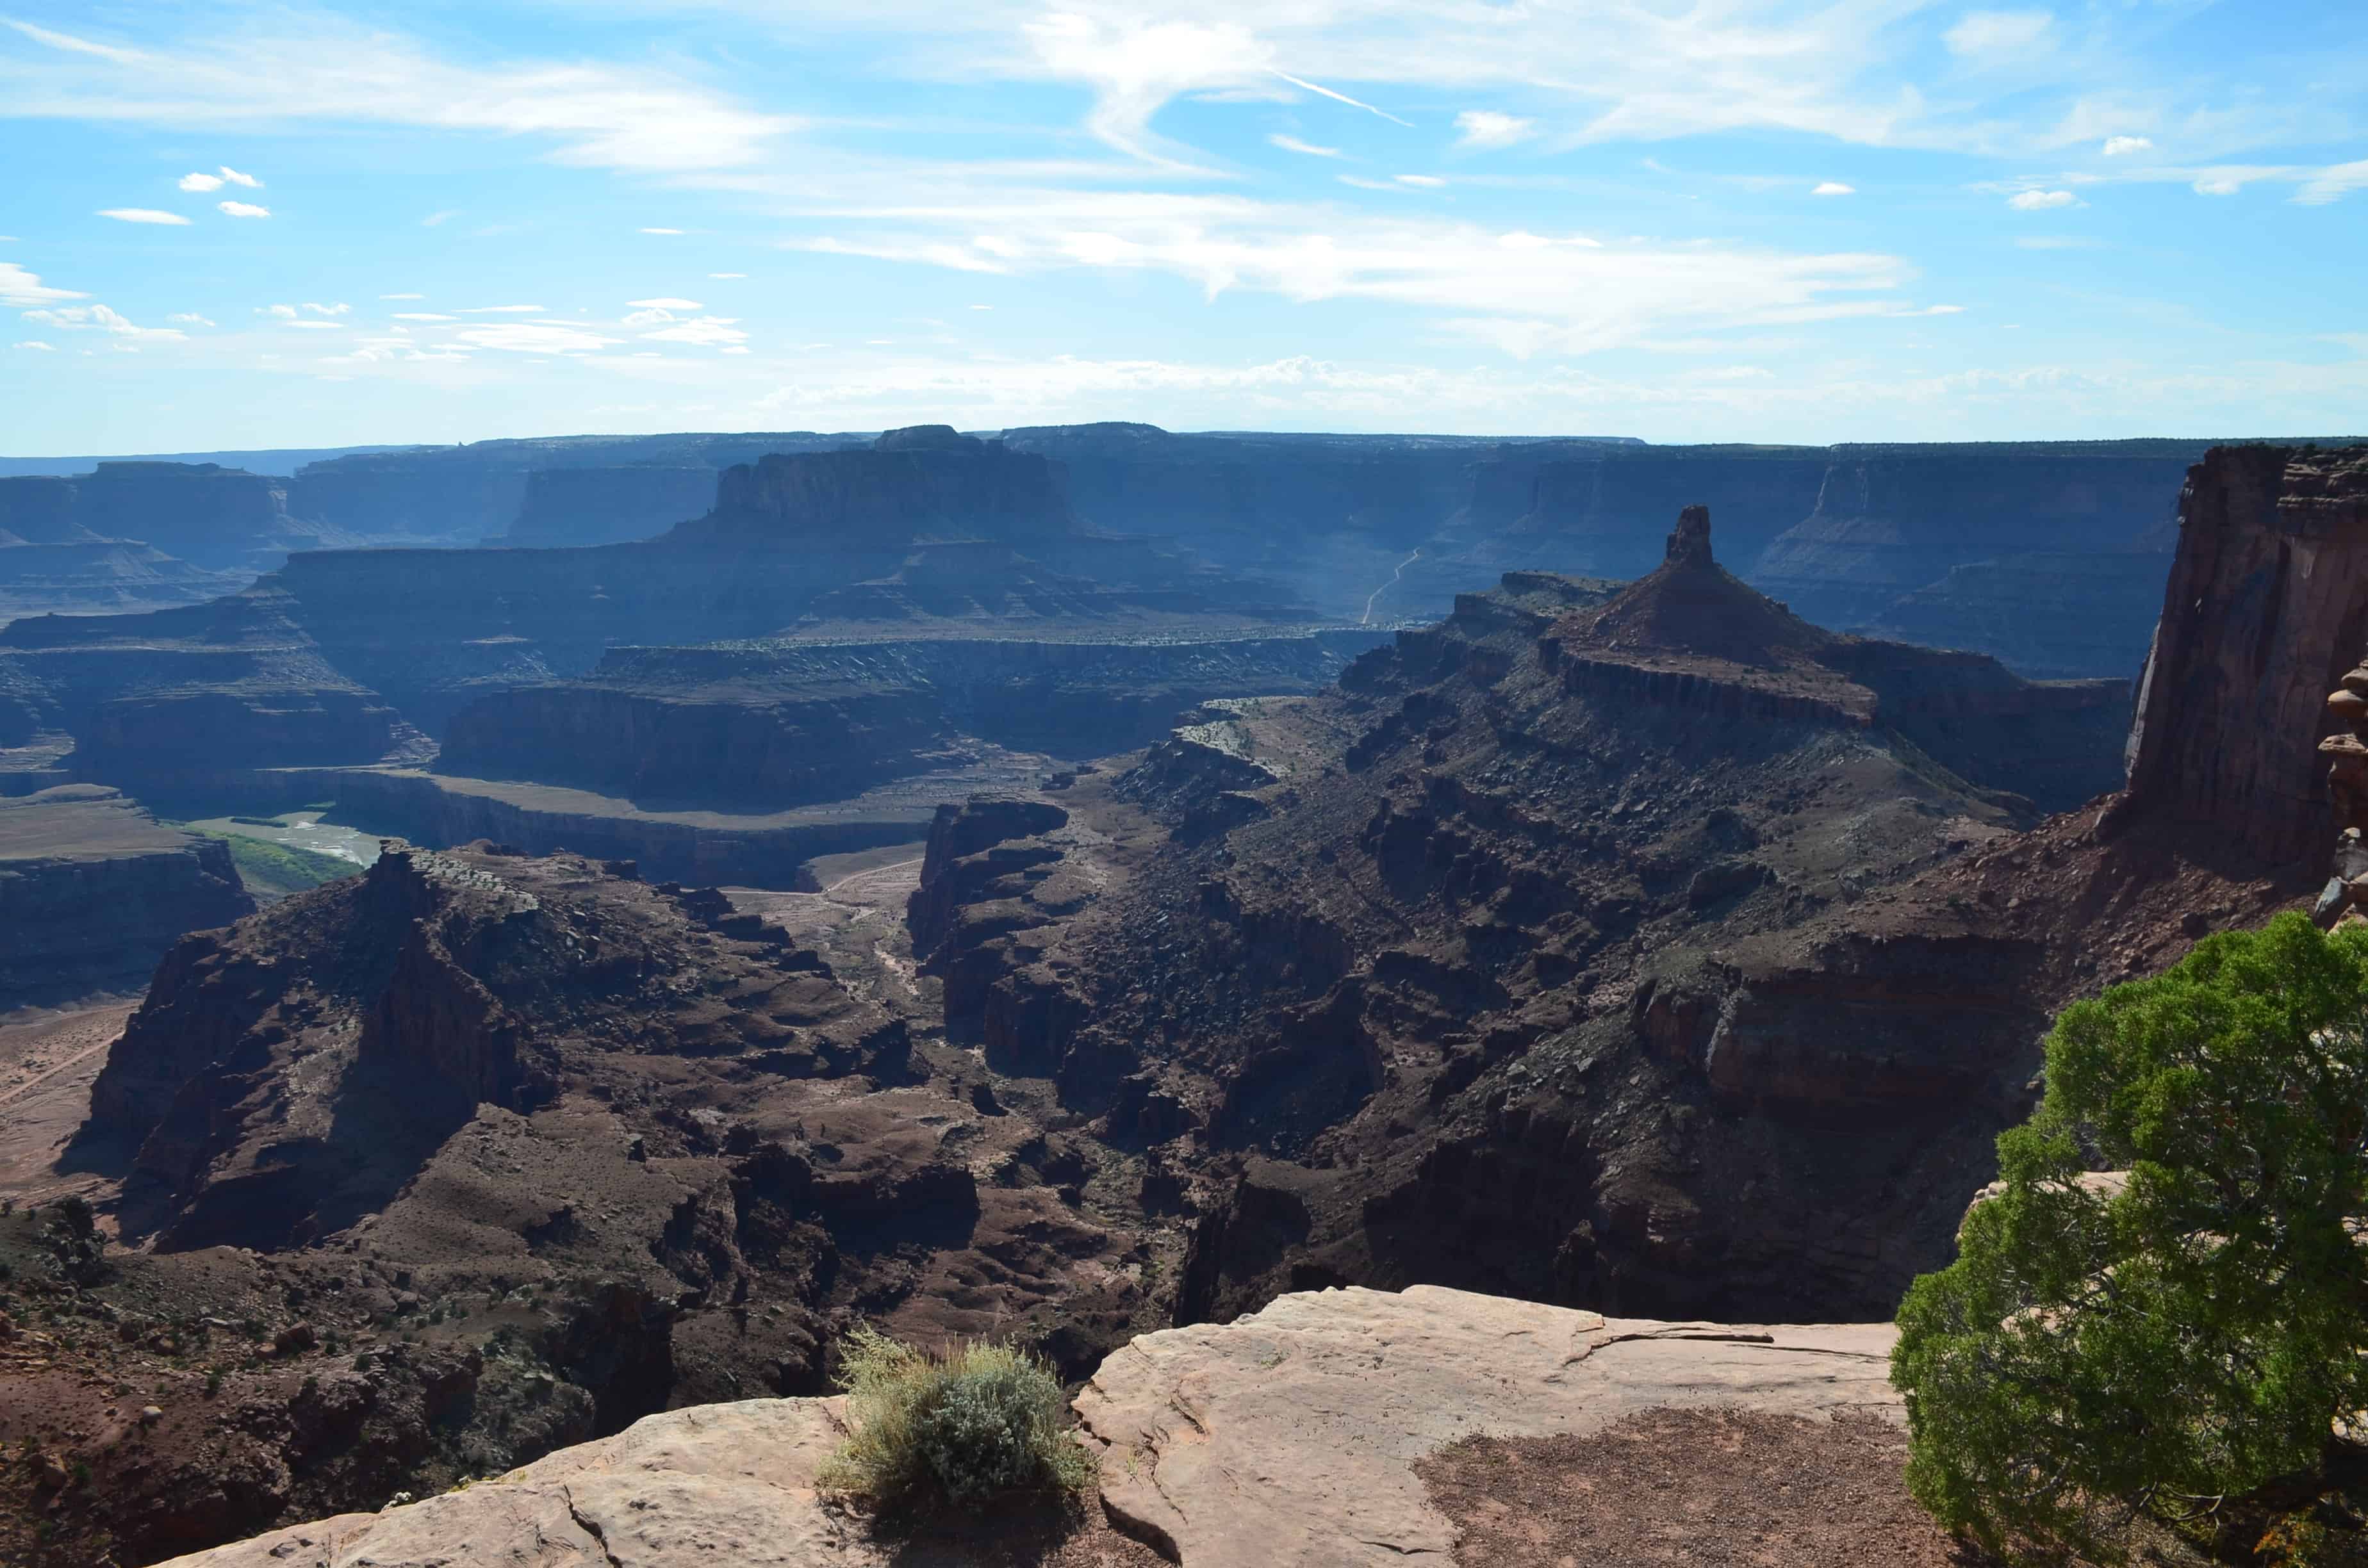 View from Meander Overlook at Dead Horse Point State Park in Utah